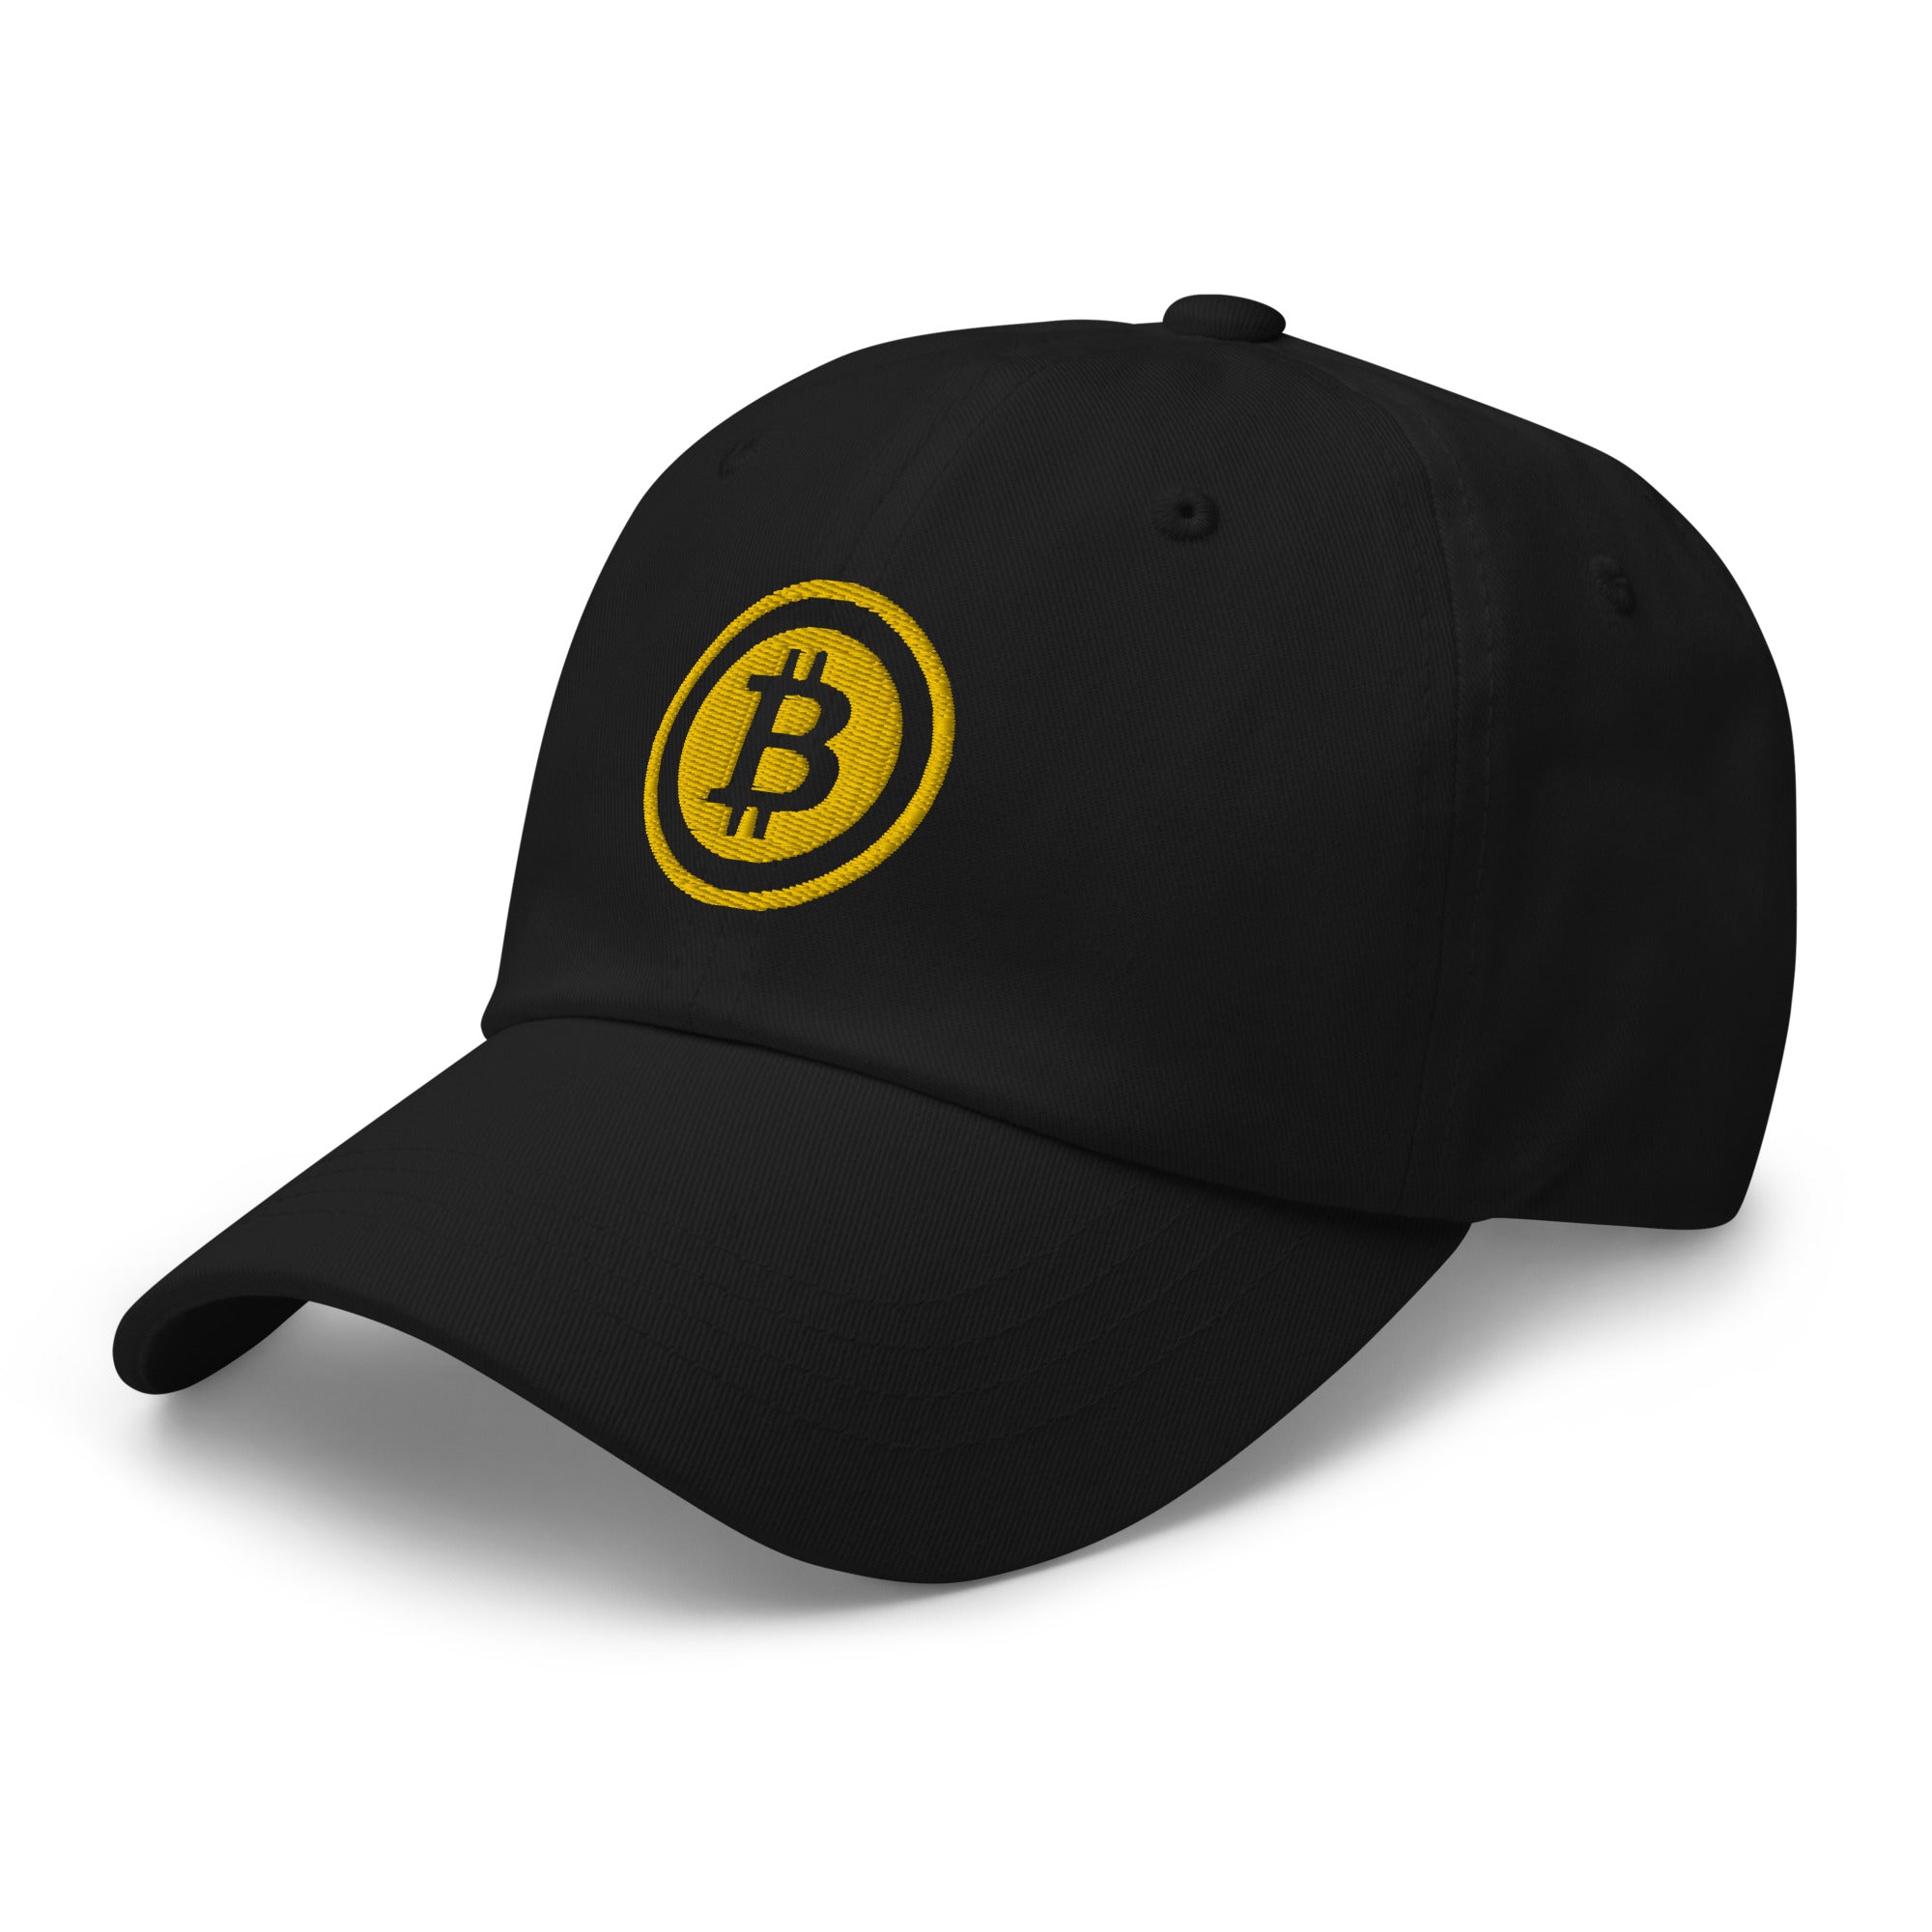 Bitcoin Crypto Currency Symbol Ticker Embroidered Baseball Cap Dad hat - Edge of Life Designs